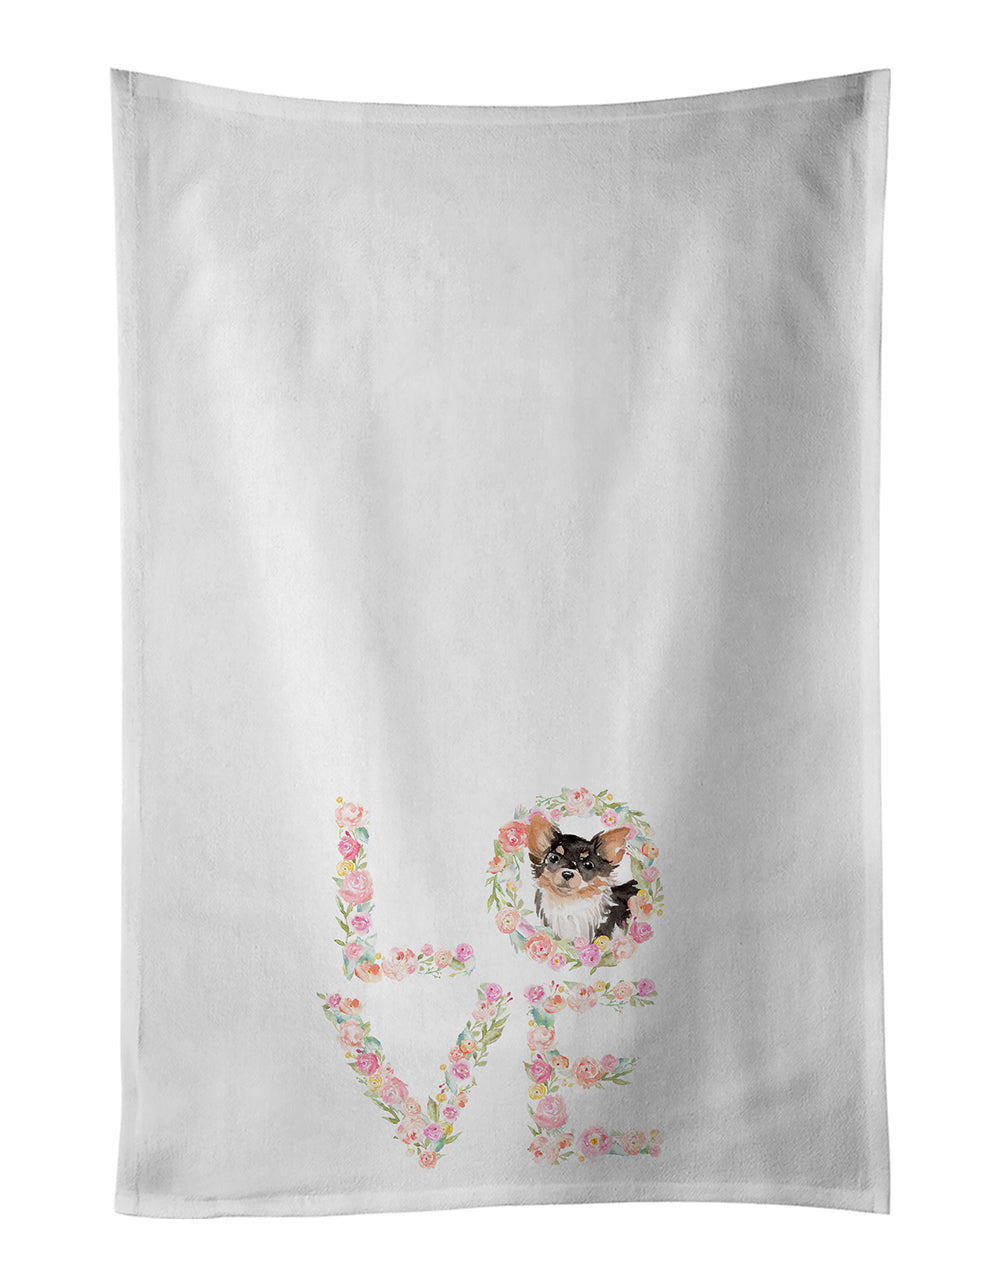 Buy this Black Tan Longhaired Chihuahua Love White Kitchen Towel Set of 2 Dish Towels